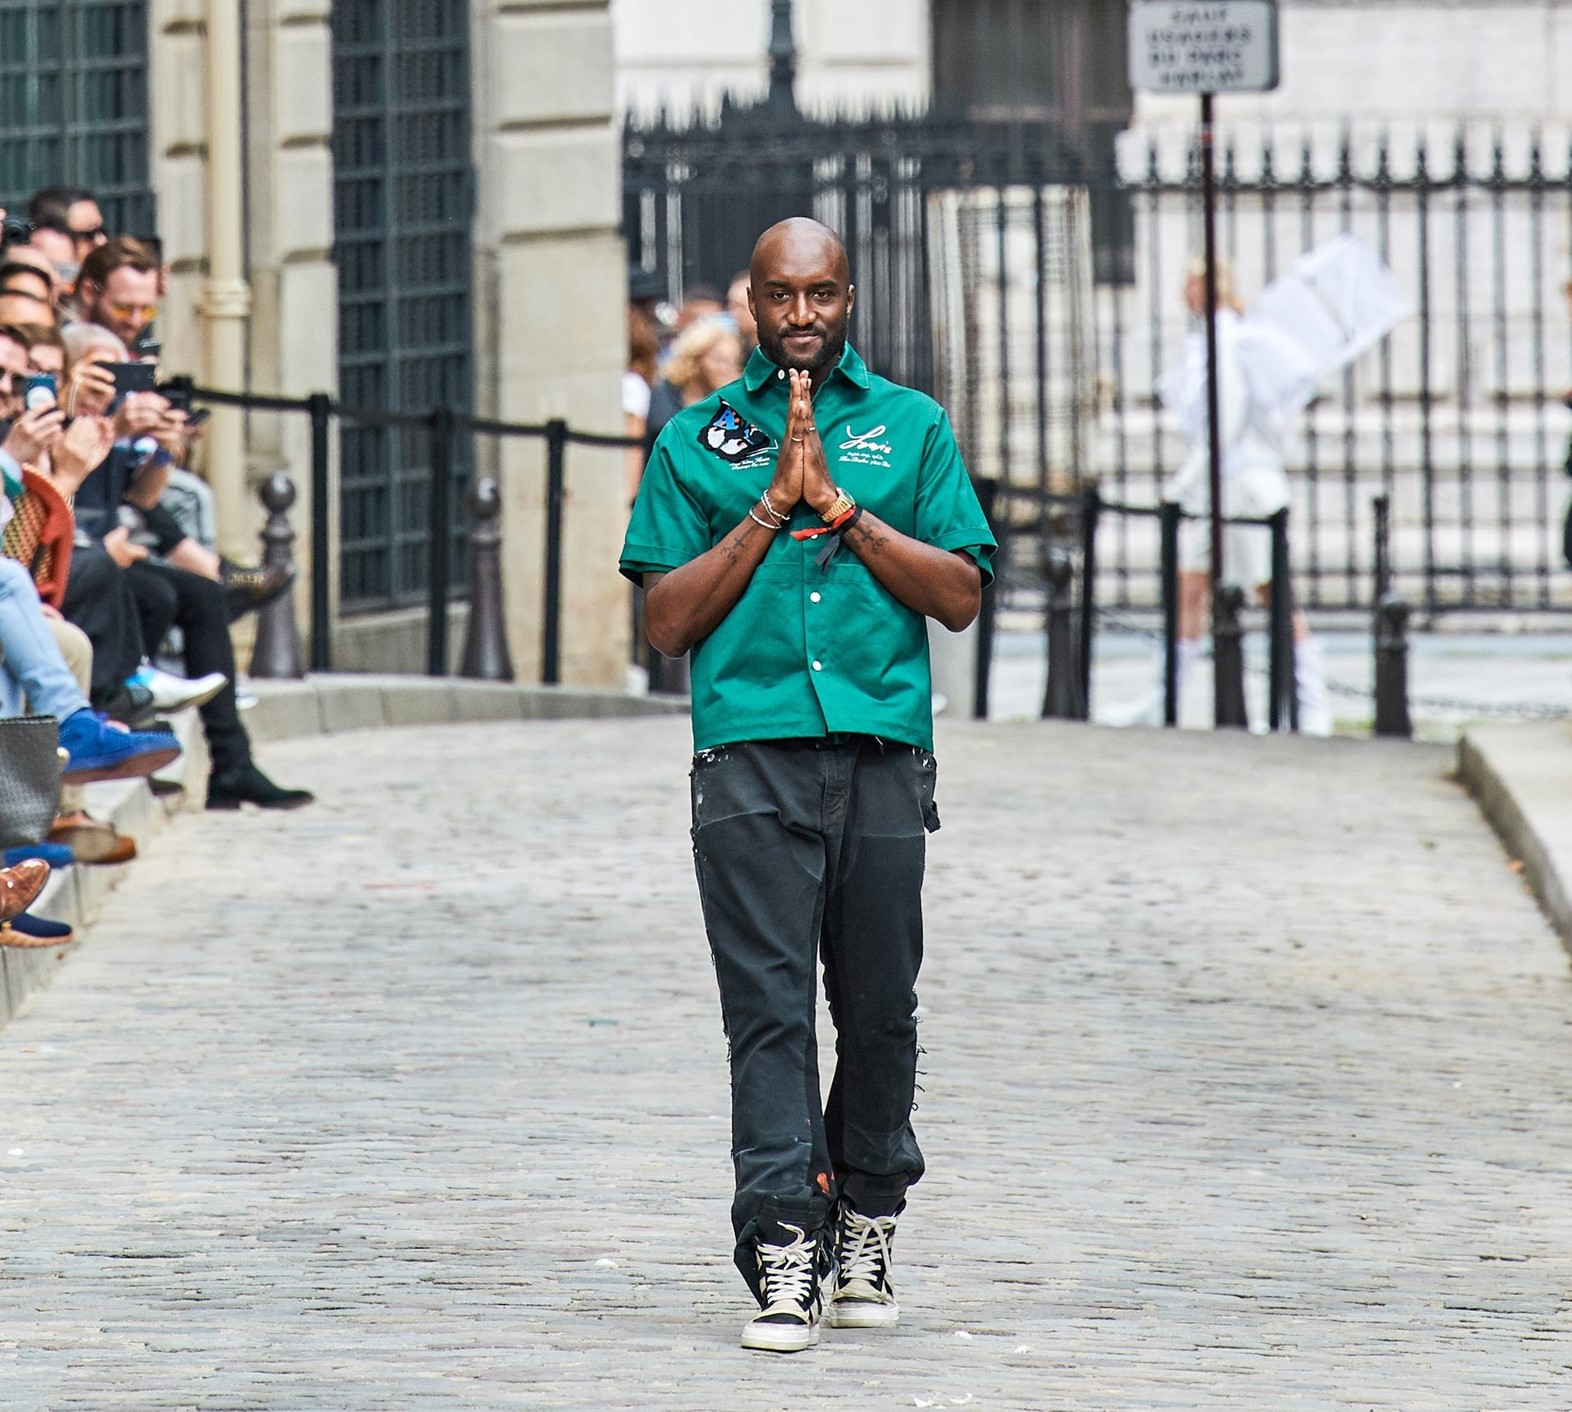 Louis Vuitton's Loving Tribute to the Soaring Vision of Virgil Abloh